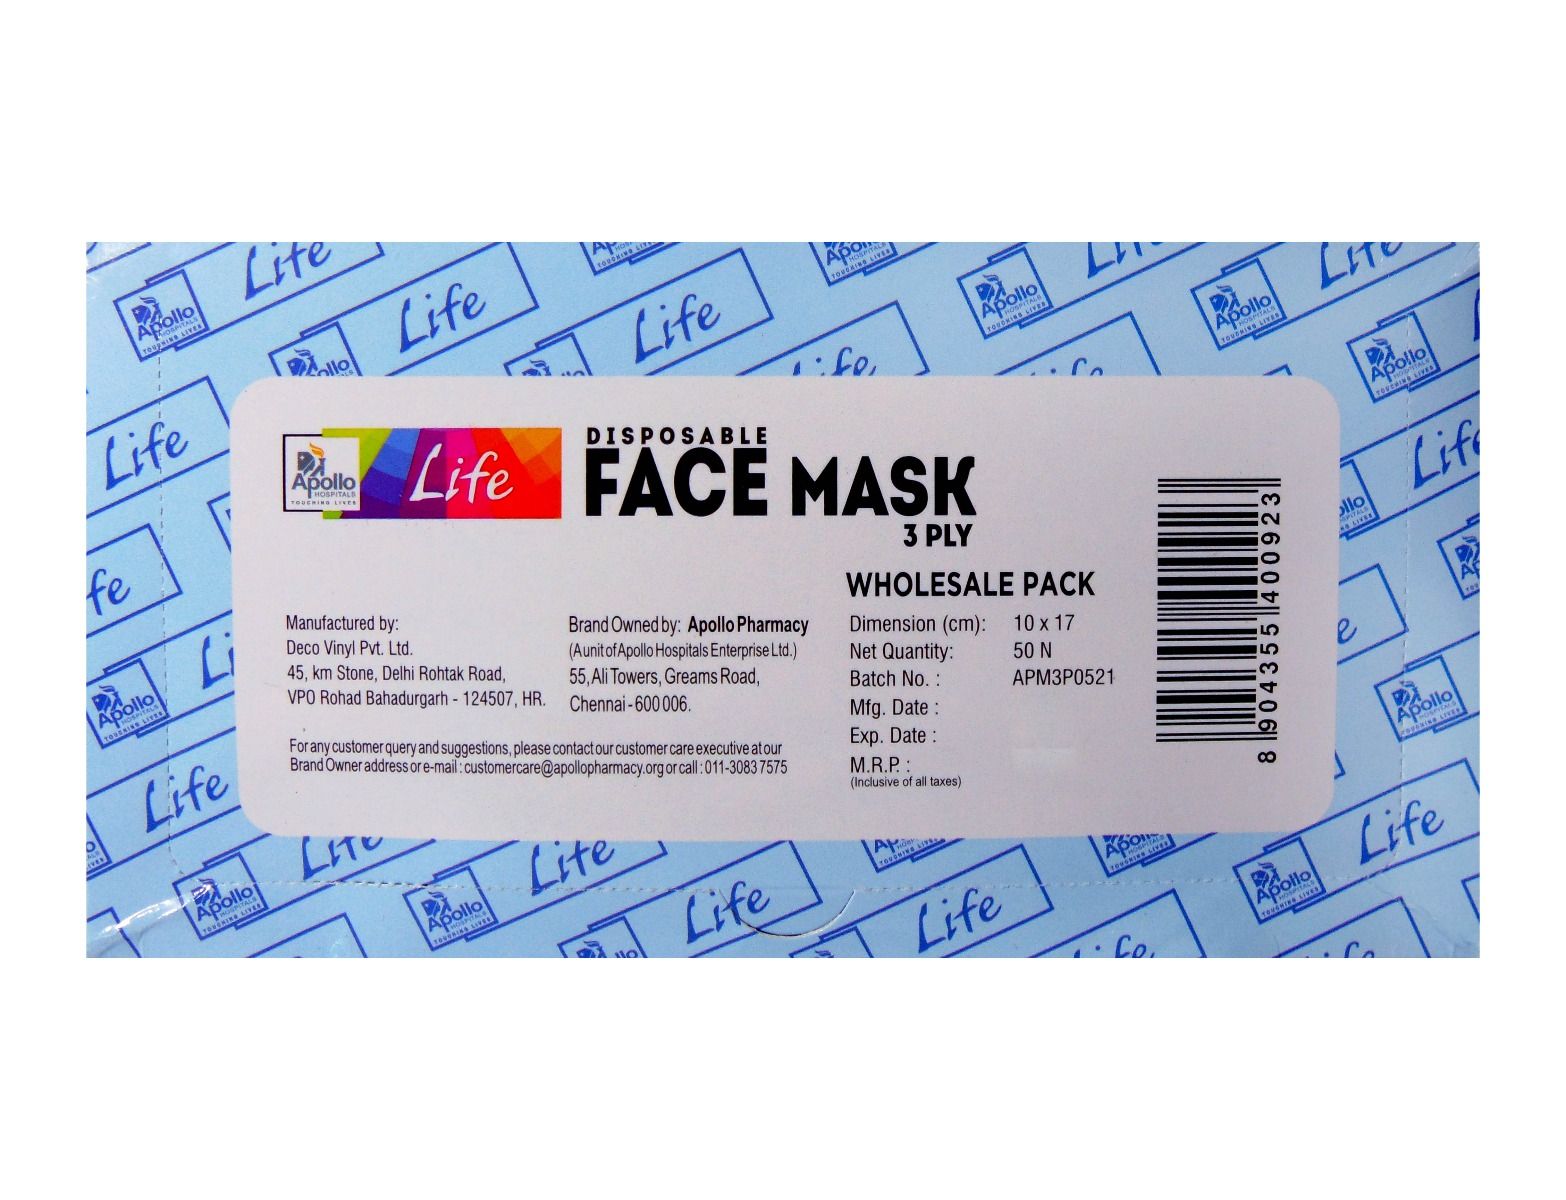 Apollo Life Disposable Face Mask 3 Ply, 50 Count, Pack of 50 S